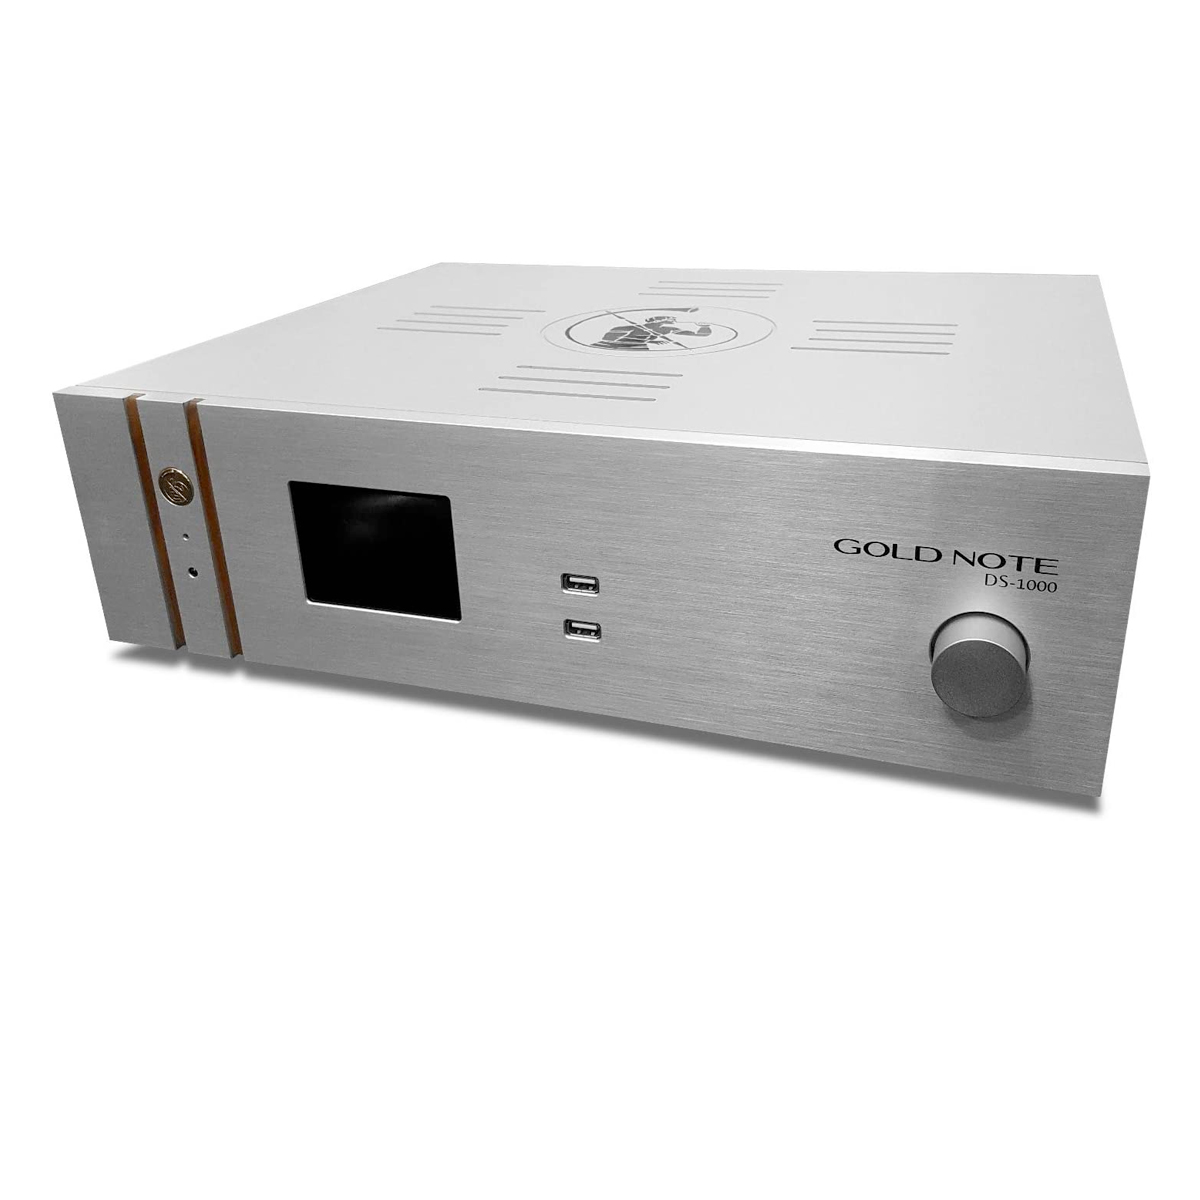 Gold Note DS-1000 DAC